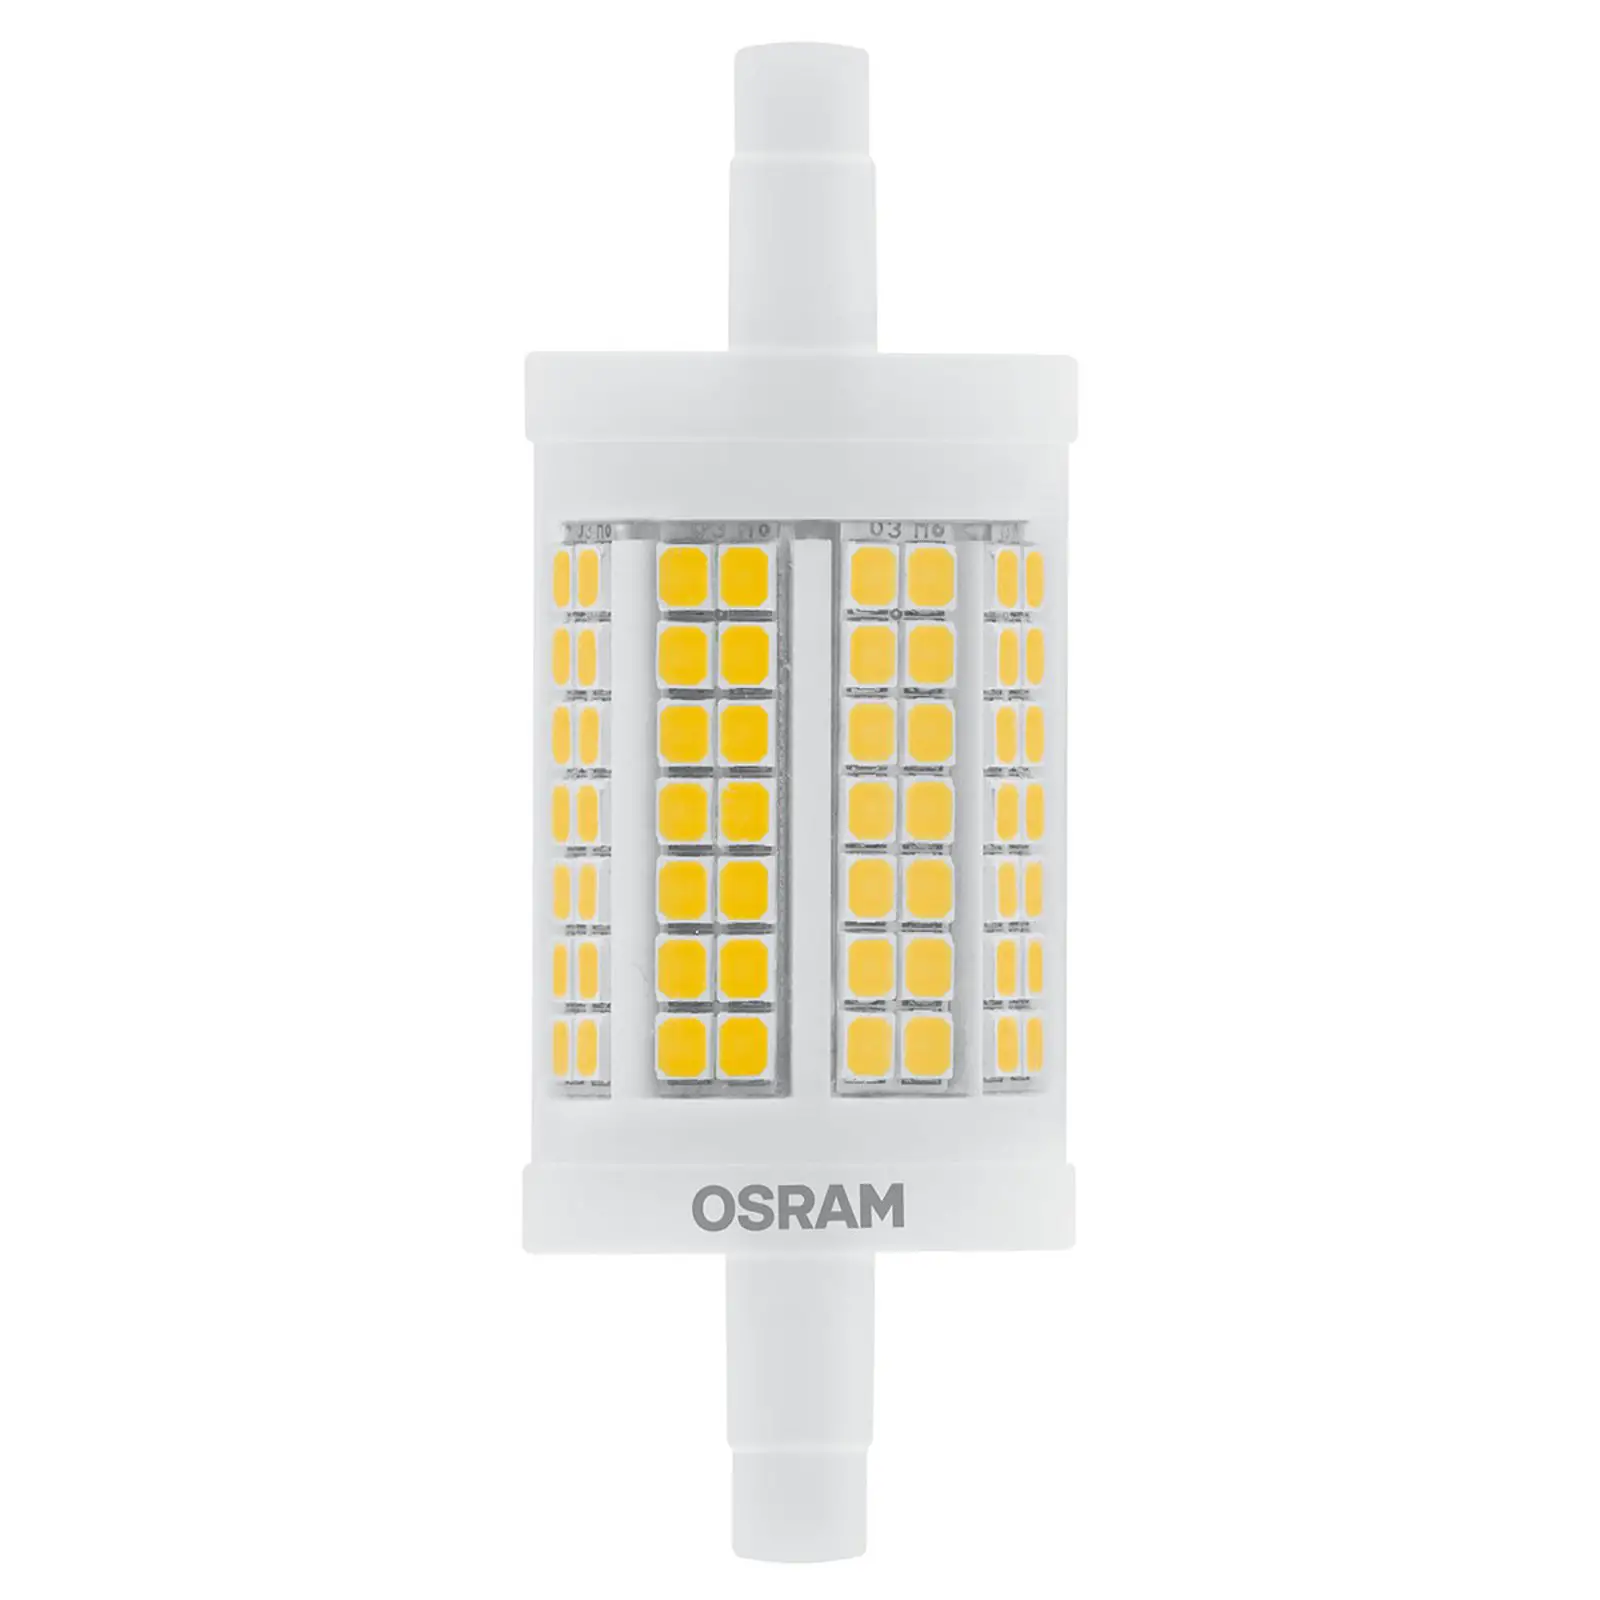 Osram led staaflamp r7s 11